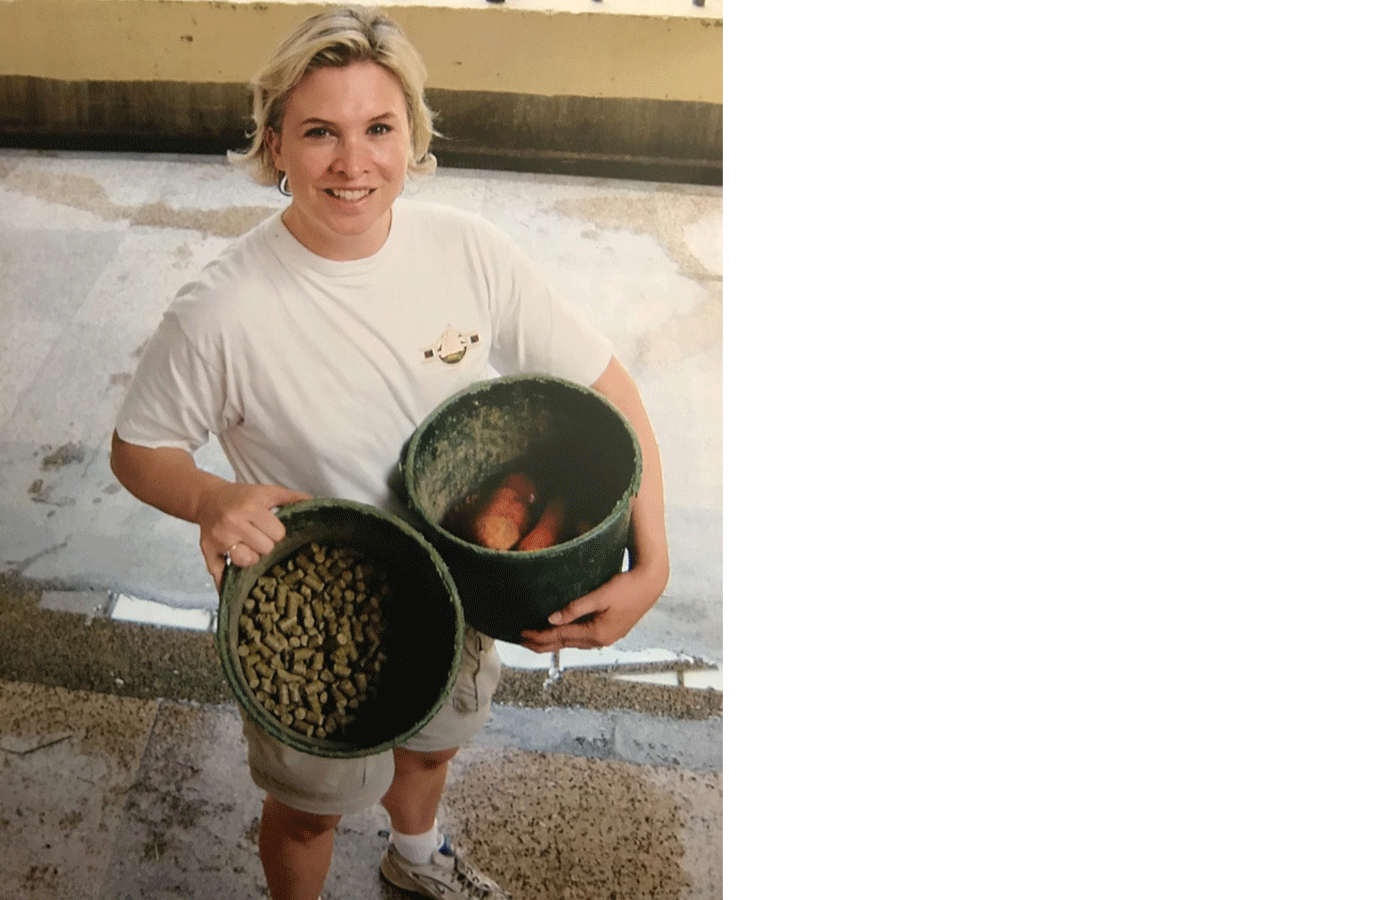 A Zoo volunteer holds two buckets of food for animals